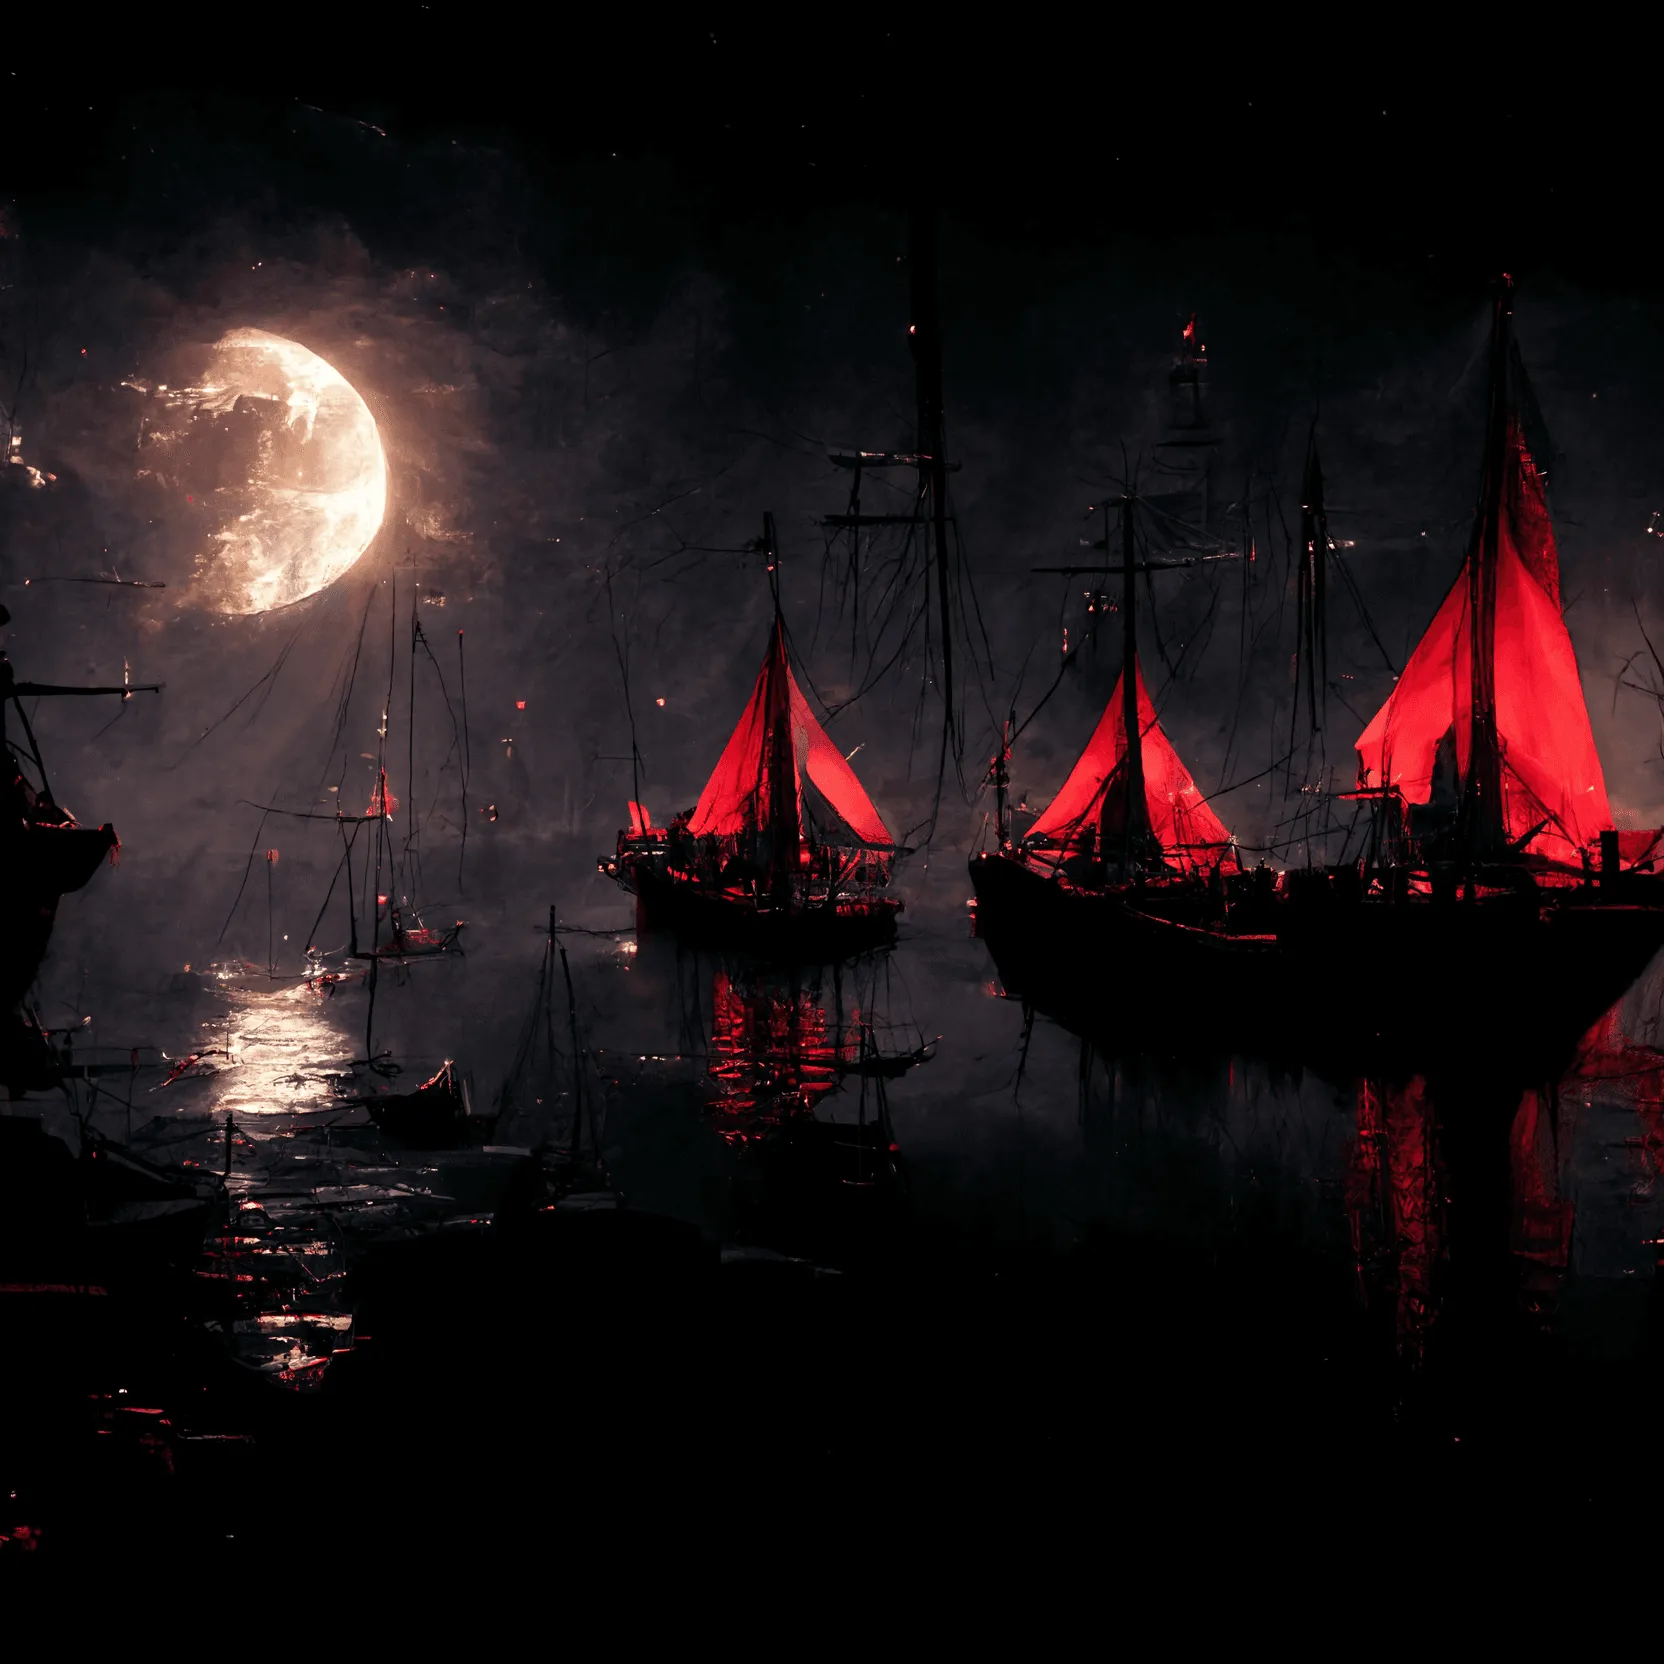 Ships of Isabella's expedition with red sailings - New World lore